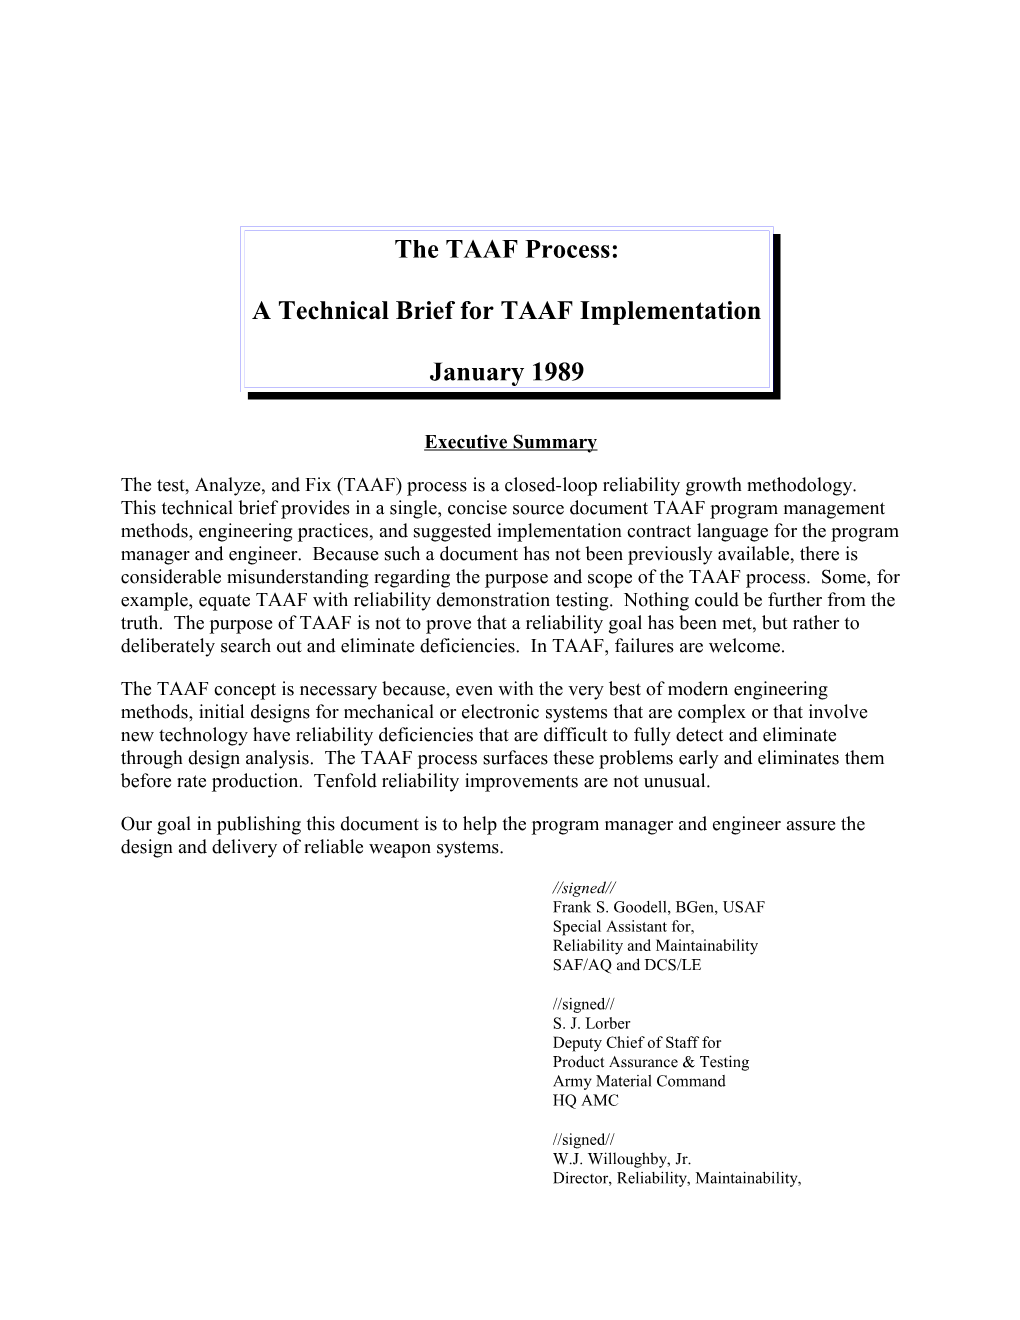 The TAAF Process: a Technical Brief for TAAF Implementation